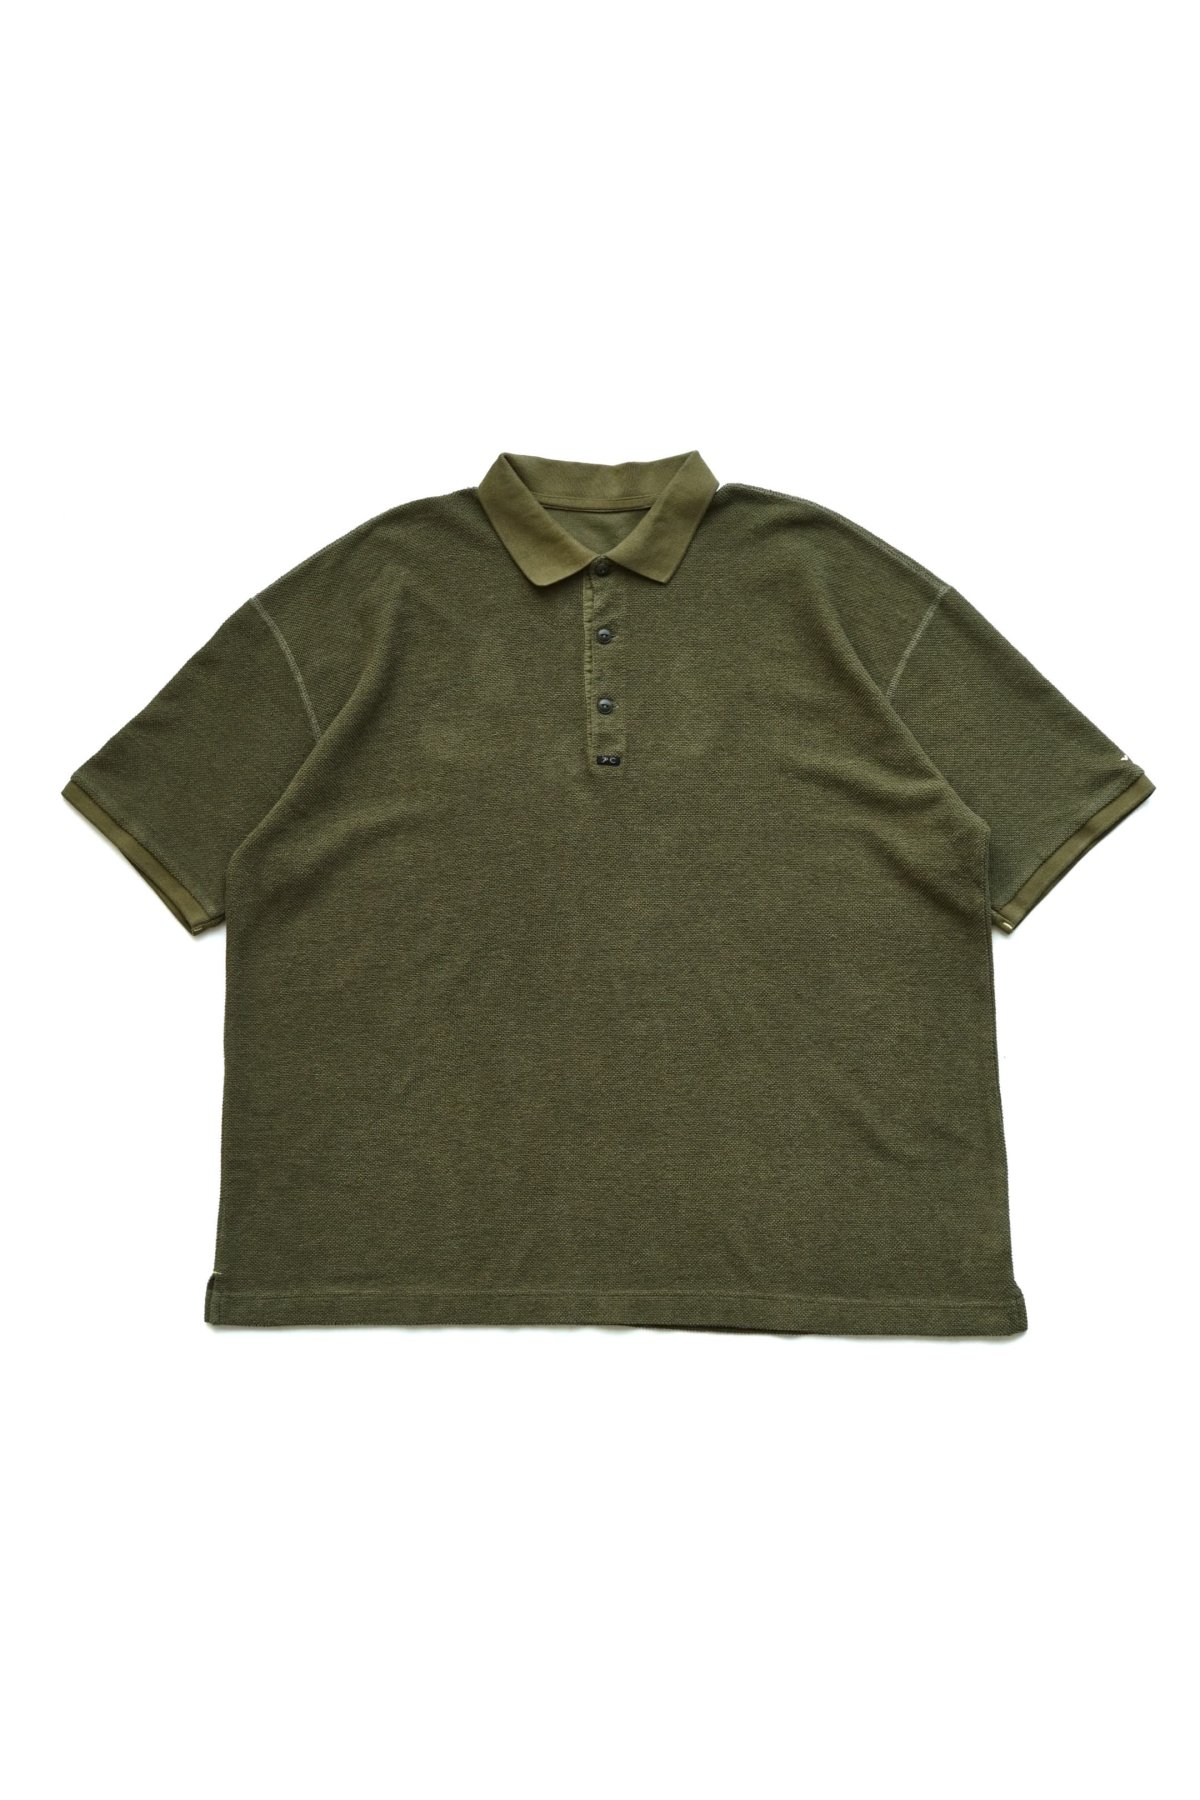 Porter Classic - SUMMER PILE POLO SHIRT - OLIVE ポーター ...